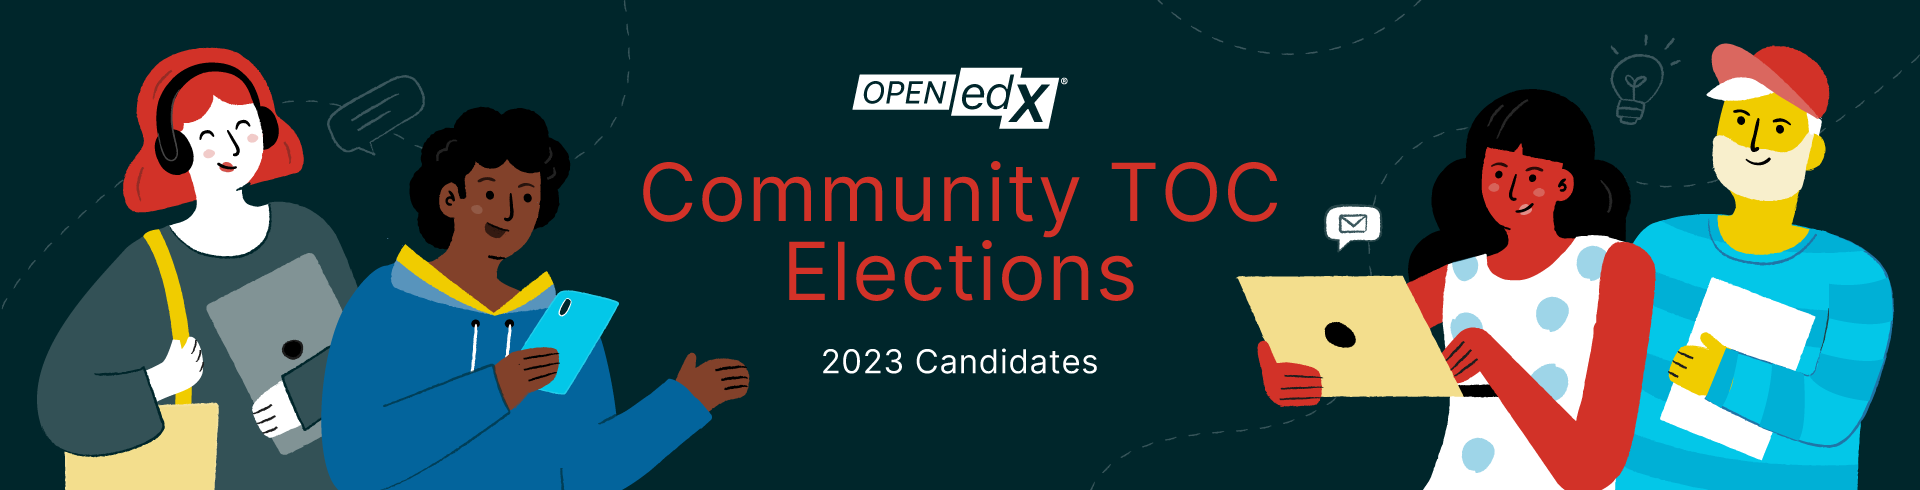 Illustrated banner for the Community TOC Elections